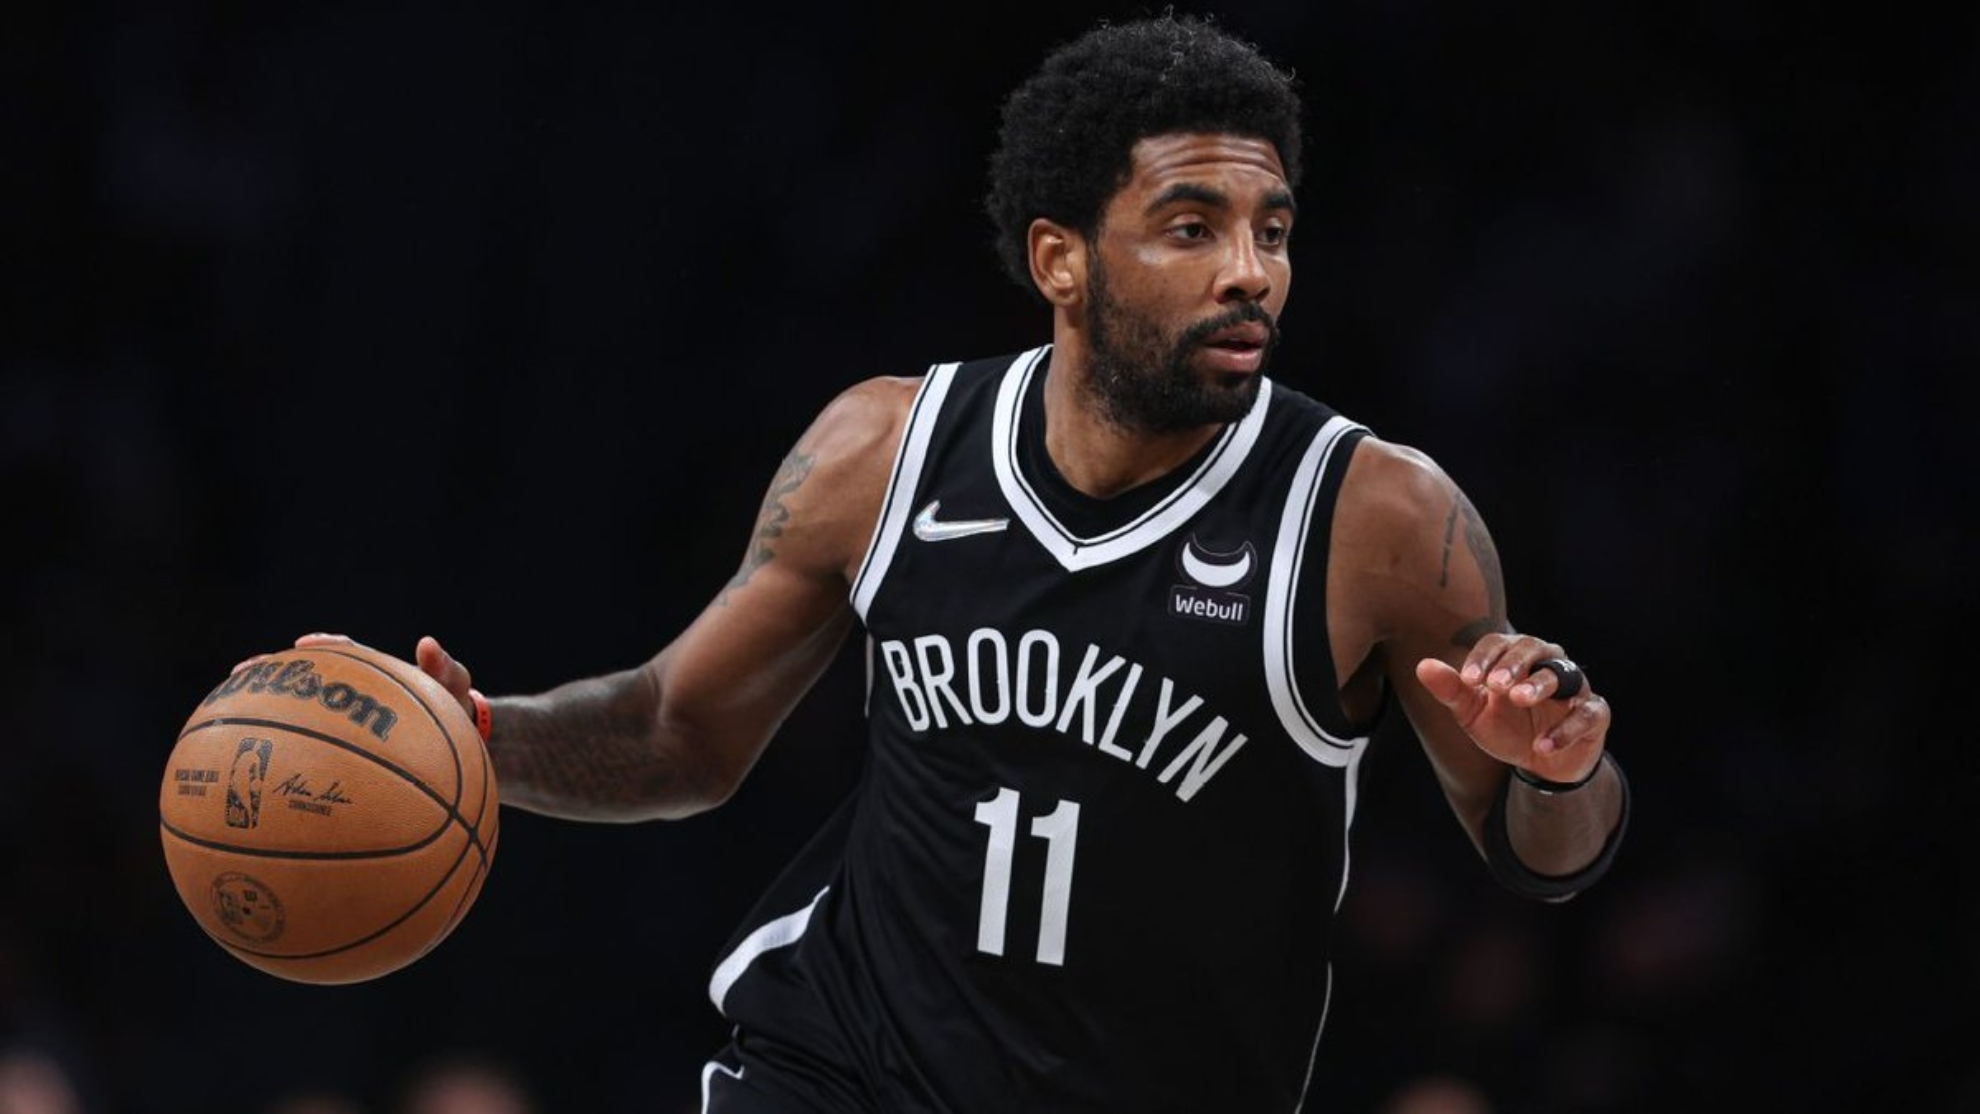 Kyrie Irving has a list of teams if the deal with Brooklyn Nets falls through